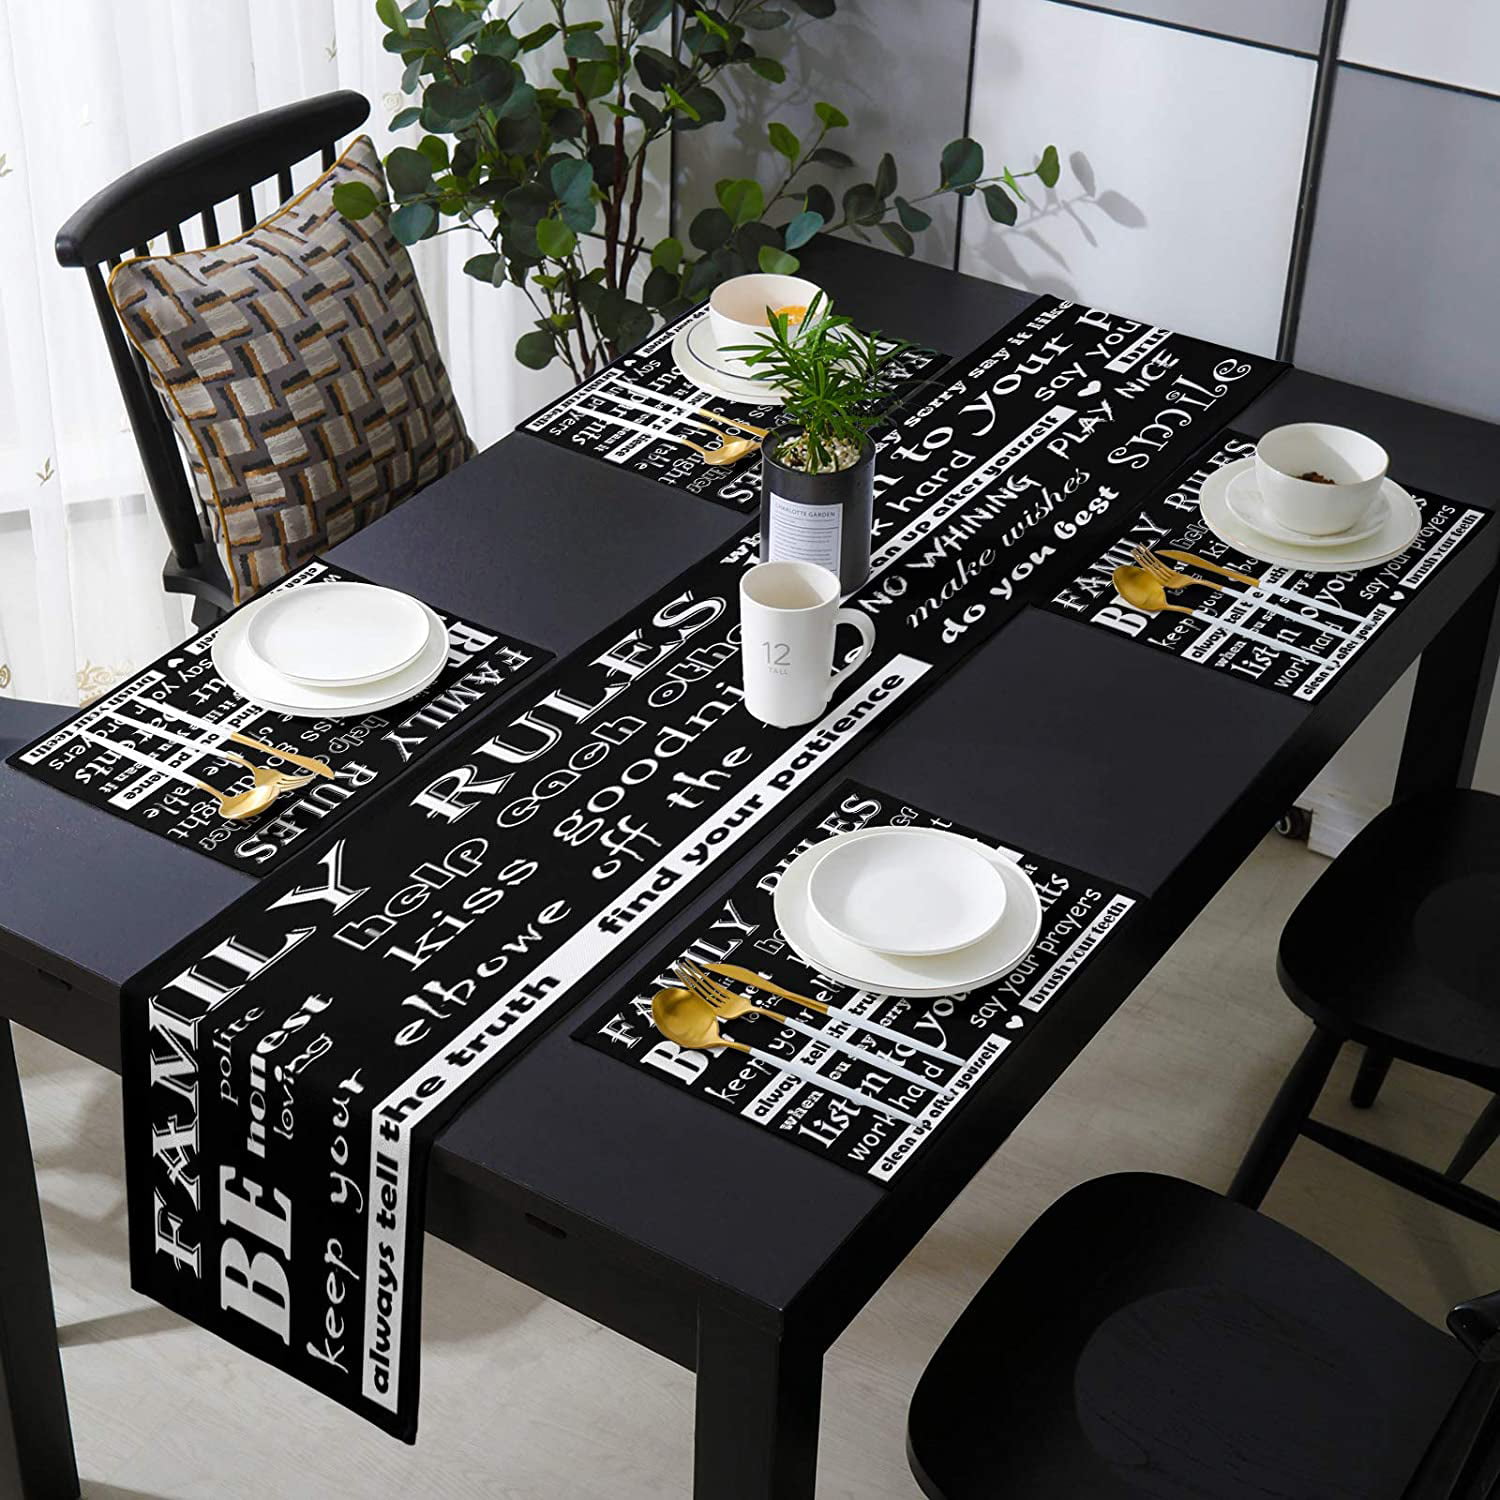 Iguohao Table Runner With 6 Place Mats, What Size Table Runner For 6 Chair Dining Room